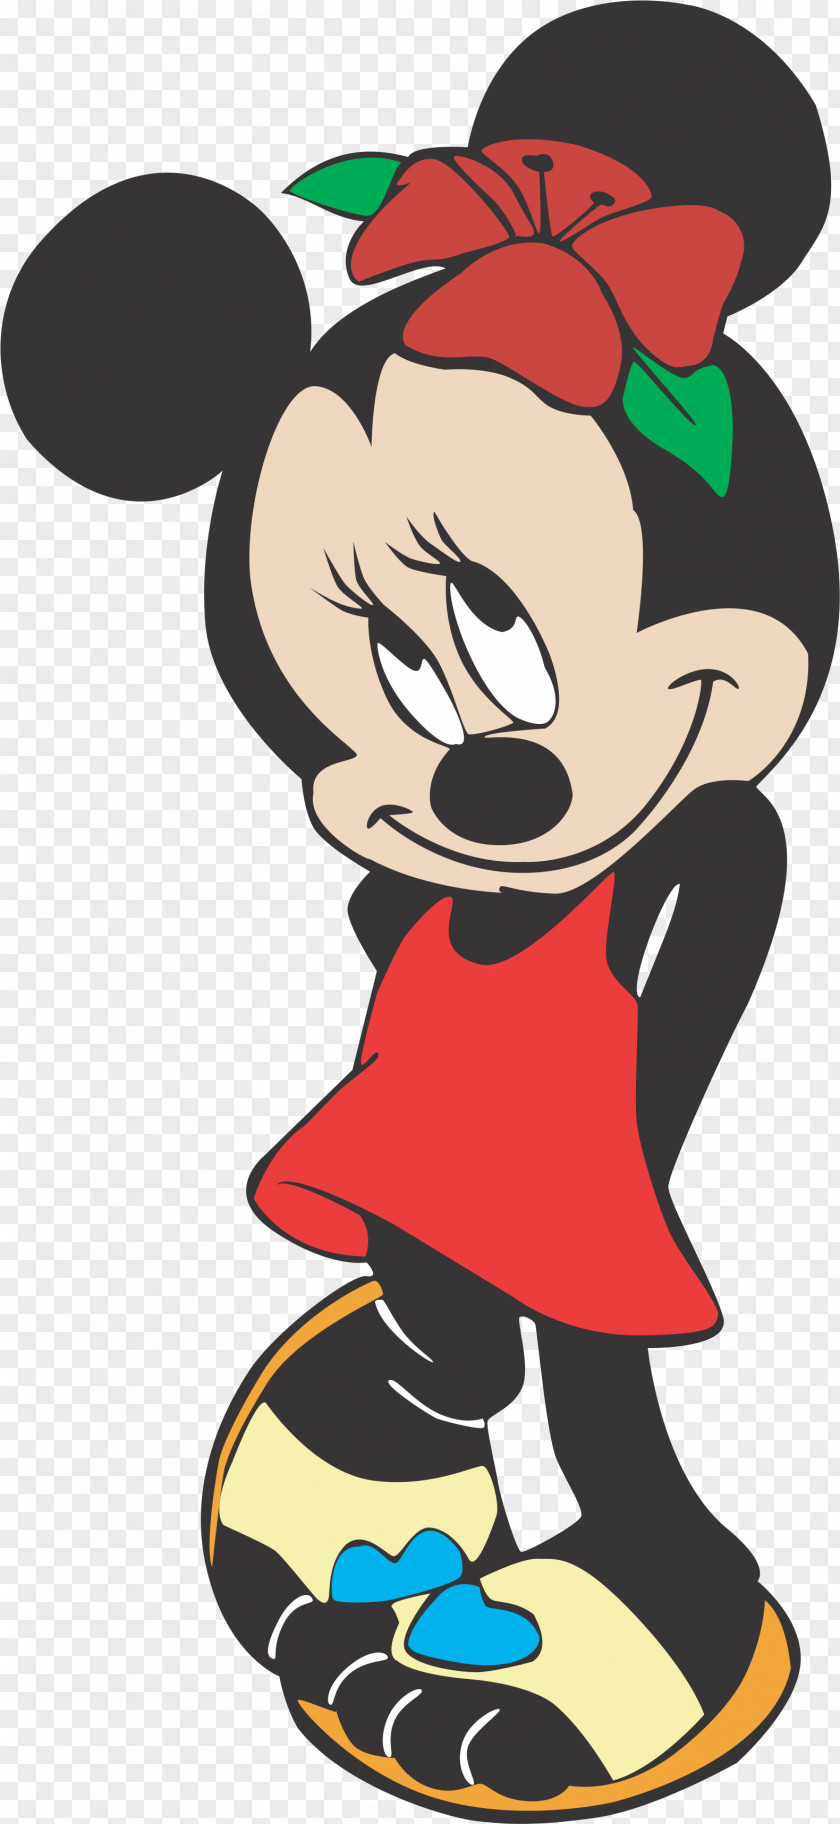 Disney Pluto Minnie Mouse Mickey Donald Duck The Walt Company PNG